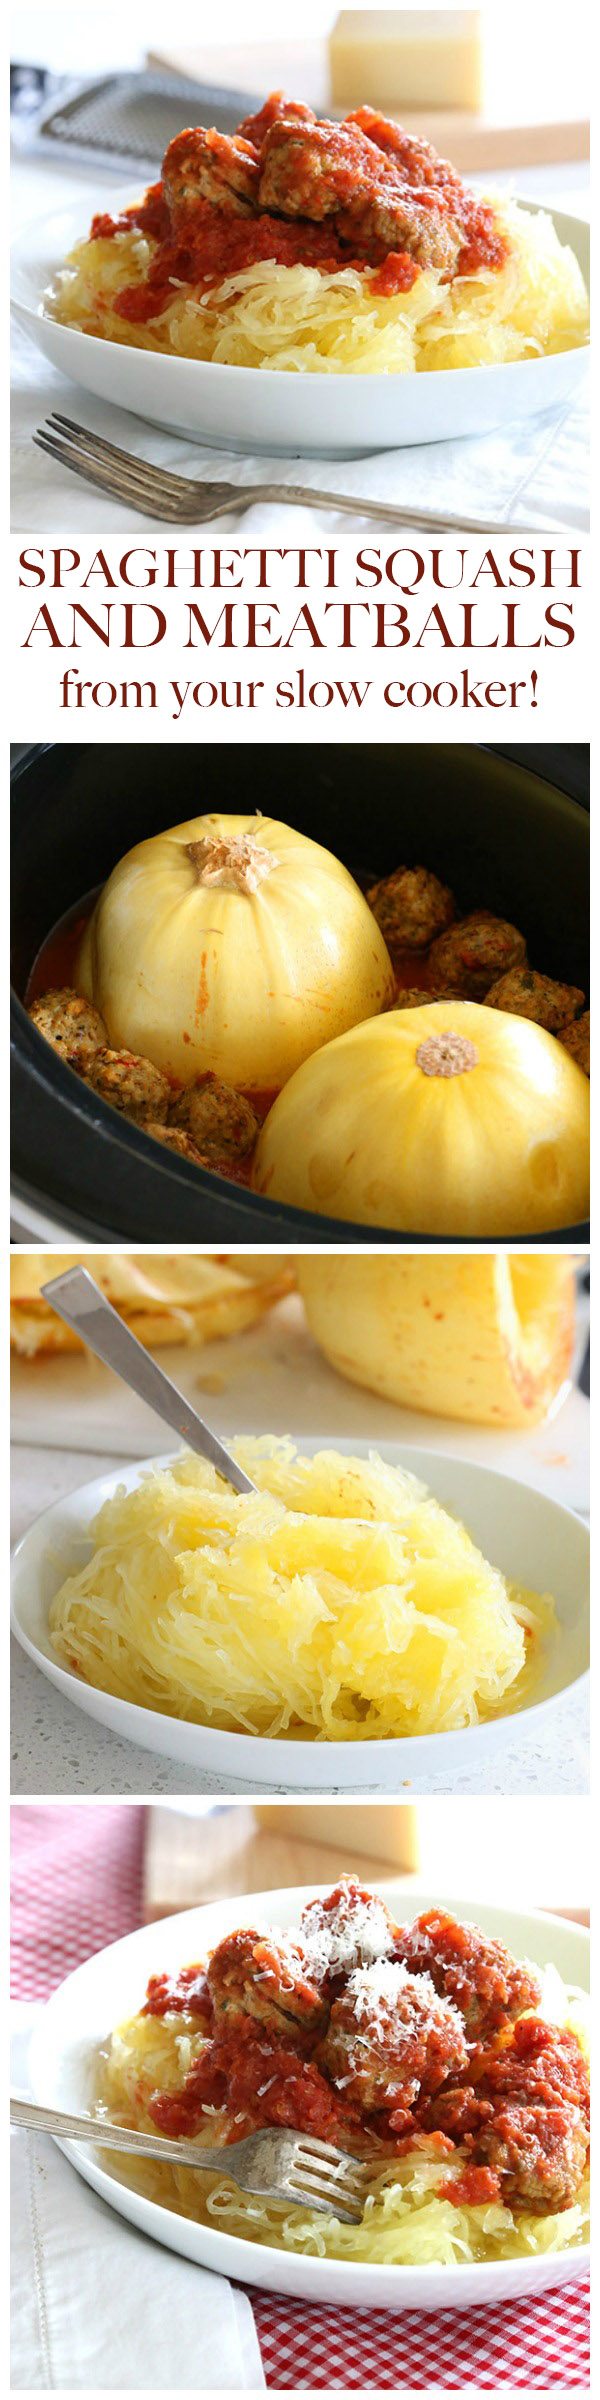 Want a healthy, low carb dinner with almost no prep work? Let your crockpot do all the cooking while you relax with this slow cooker spaghetti squash and meatball recipe